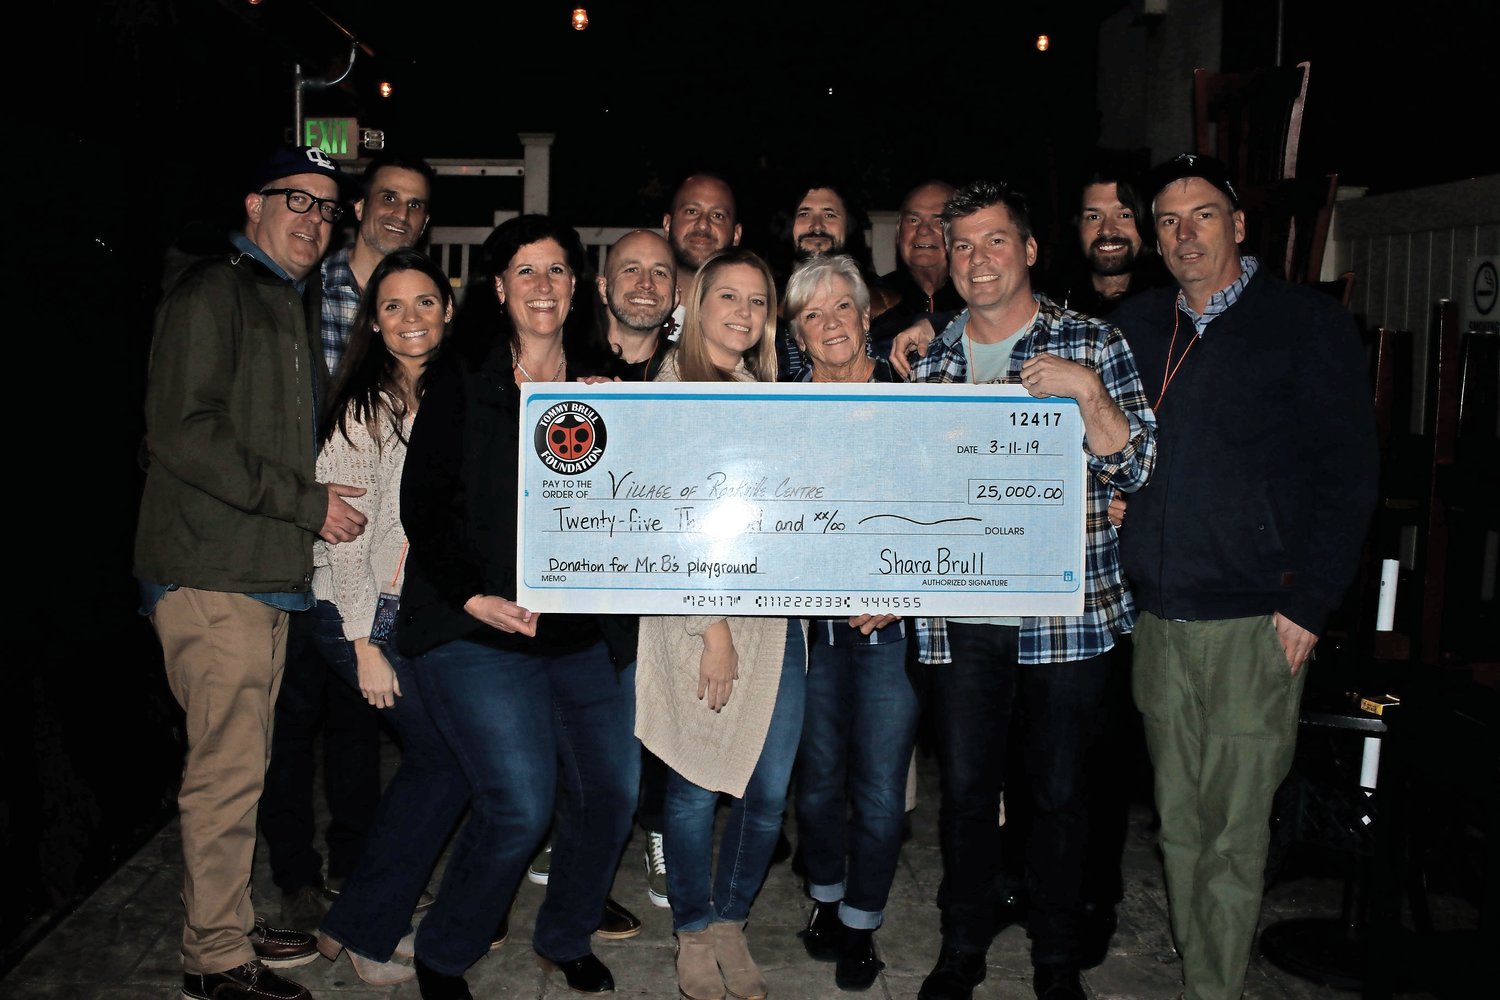 Members of Taking Back Sunday and the Tommy Brull Foundation held a check for $25,000 to be donated to Mr. B’s Playground.